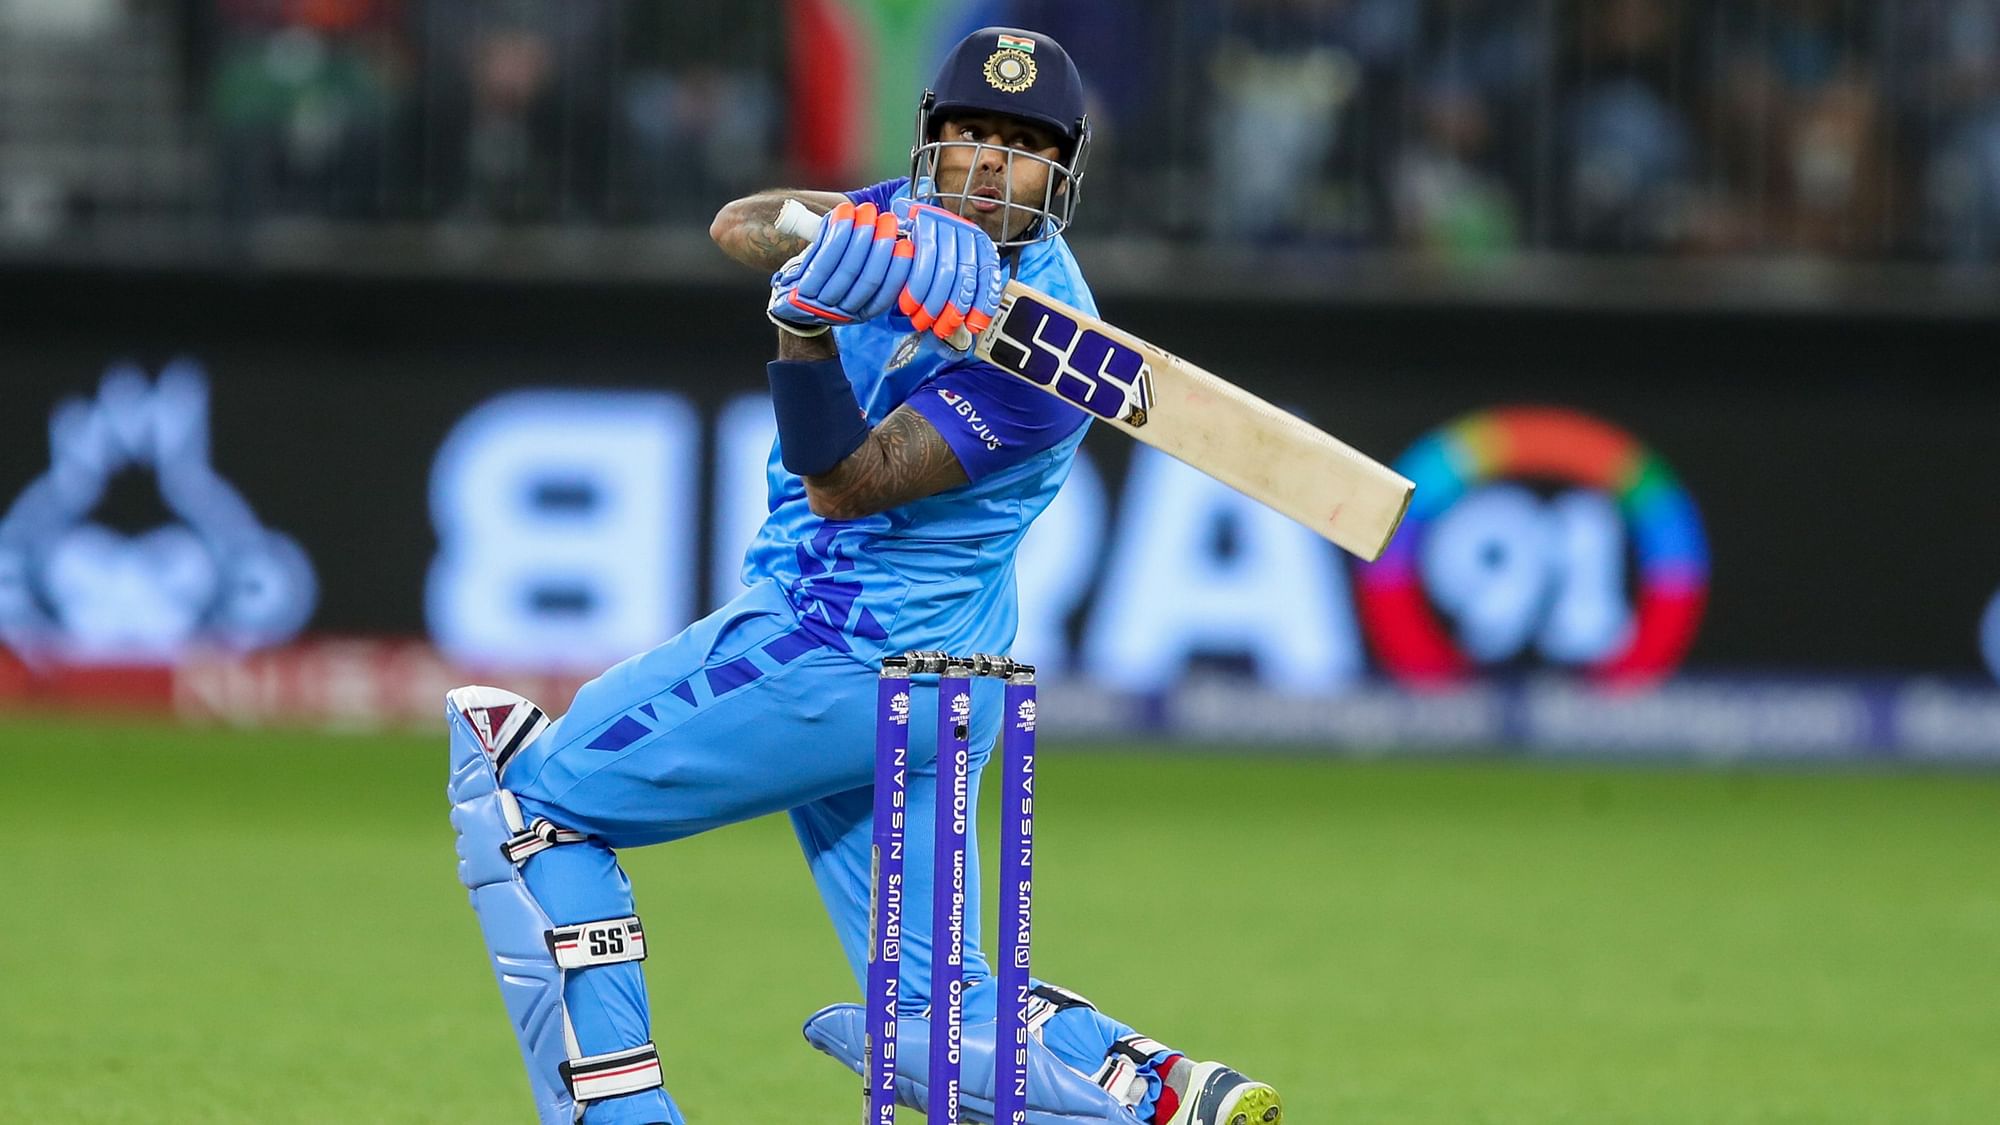 India vs Bangladesh Live Streaming, T20 World Cup 2022 IND vs BAN Match Time, Live Telecast on TV, APP and Online When, Where To Watch IND vs BAN Cricket Score